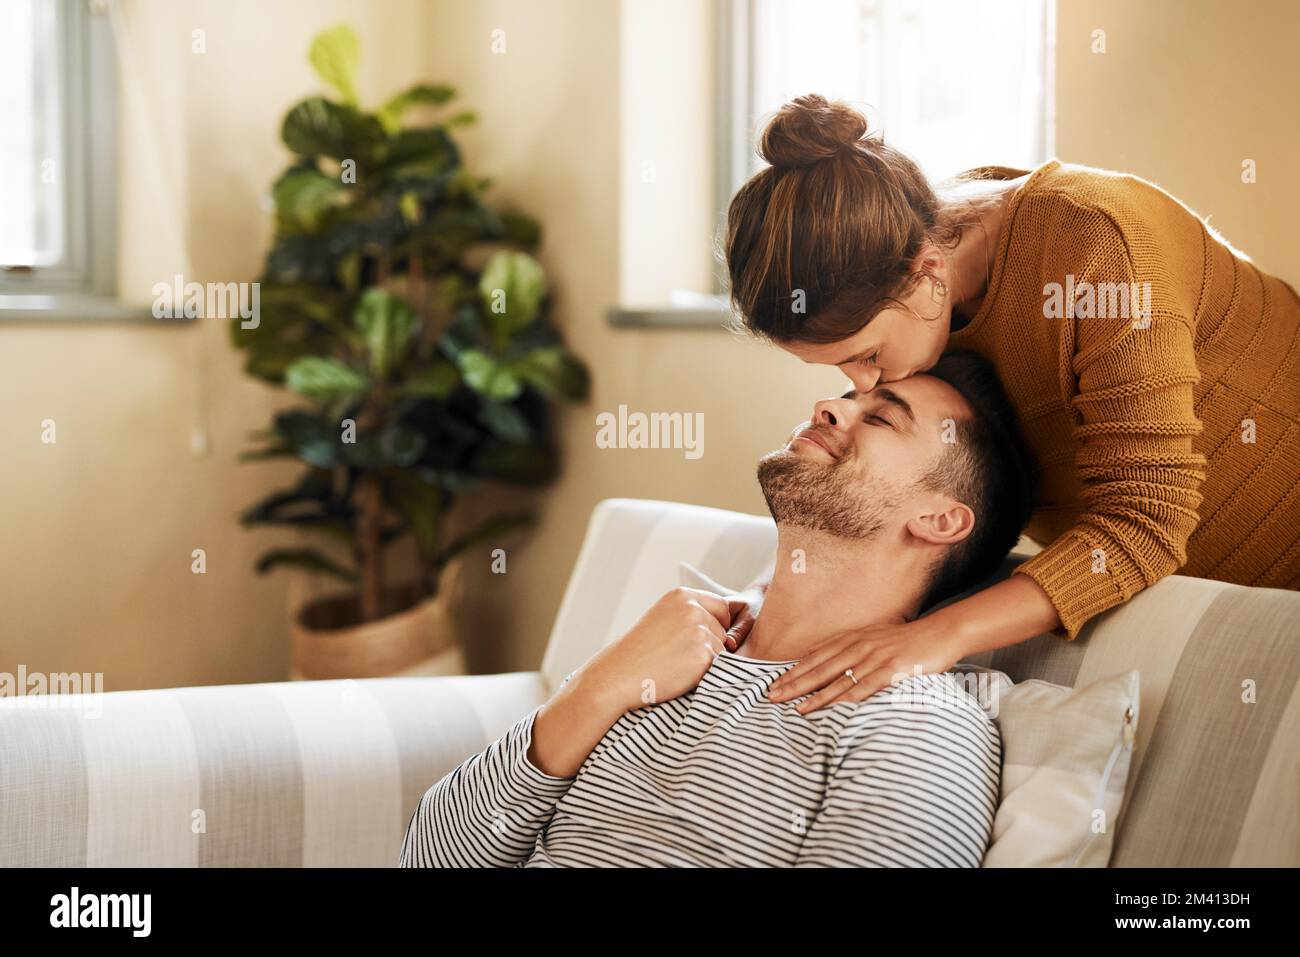 Im so lucky to have you. an affectionate couple spending quality time together at home. Stock Photo